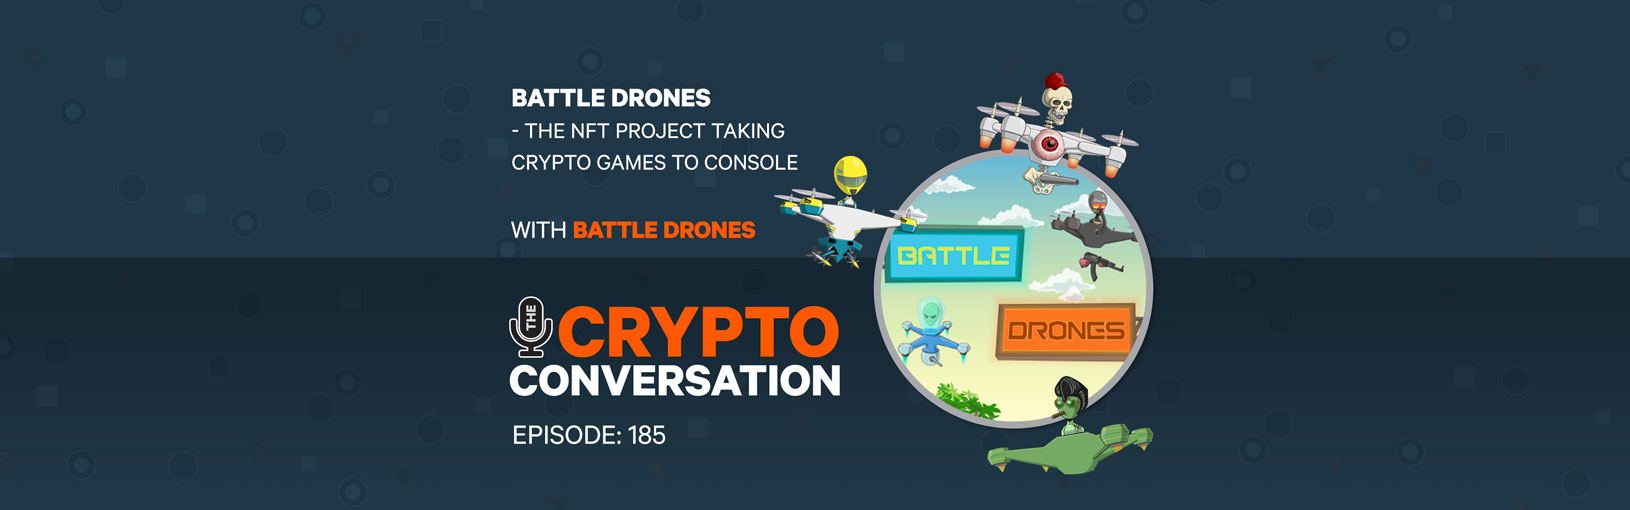 Battle Drones – The NFT project taking crypto games to console